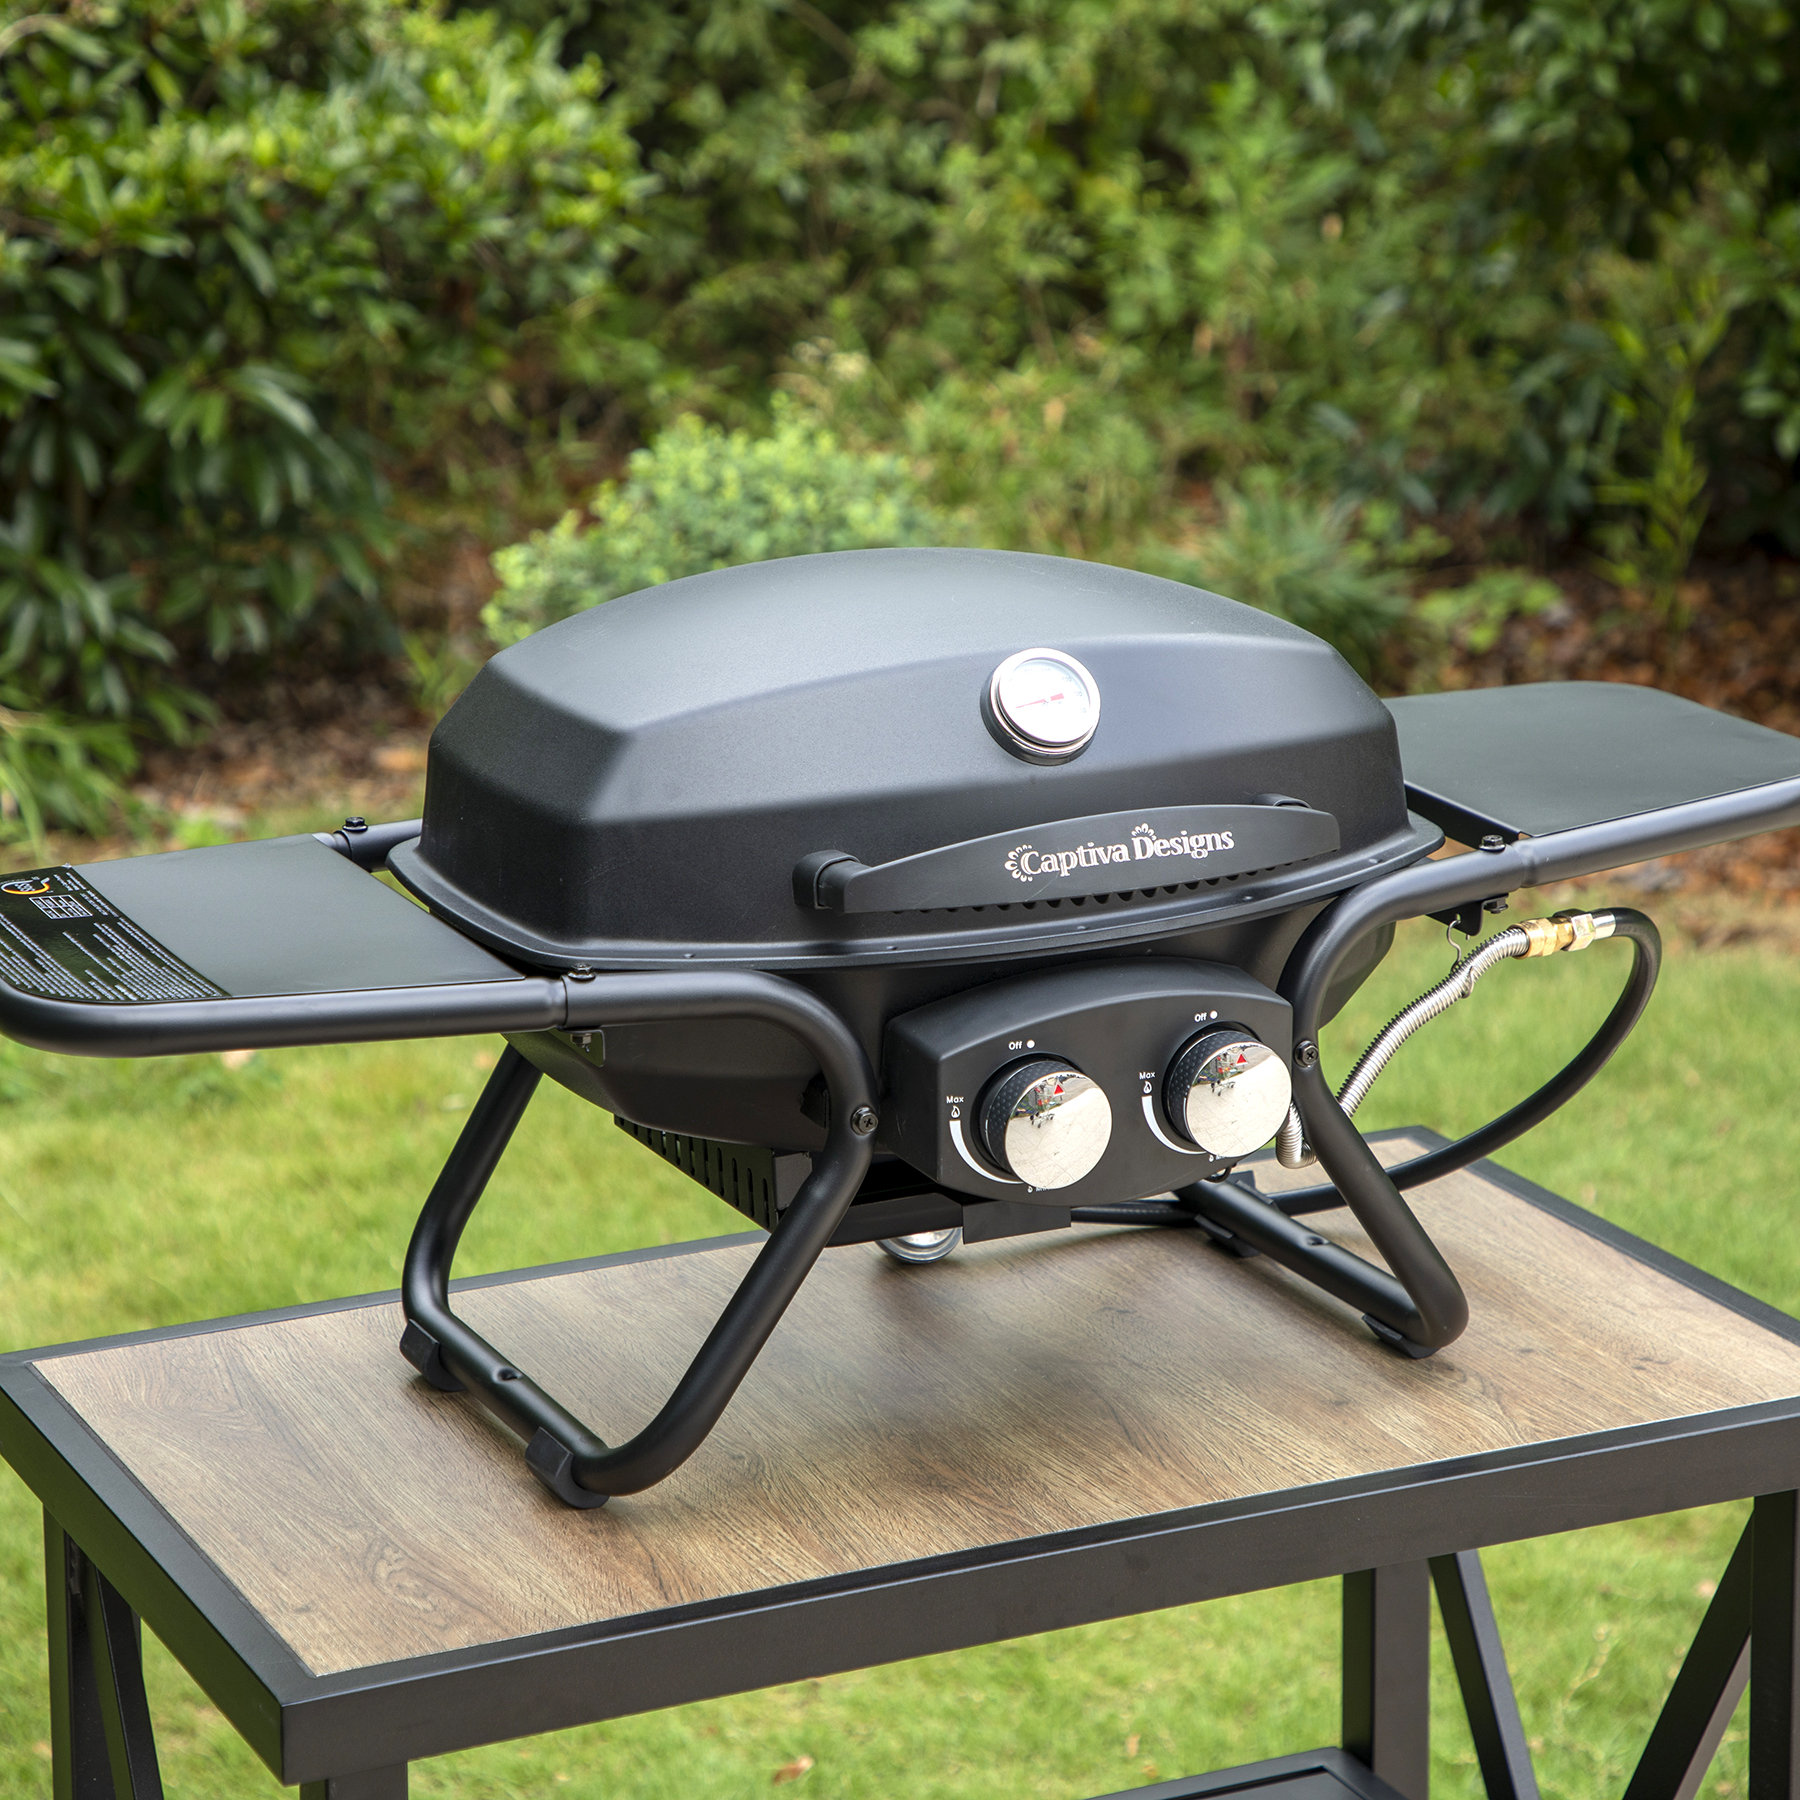 Captiva Designs Portable Tabletop Propane Grill with 2 Stainless Steel Burner